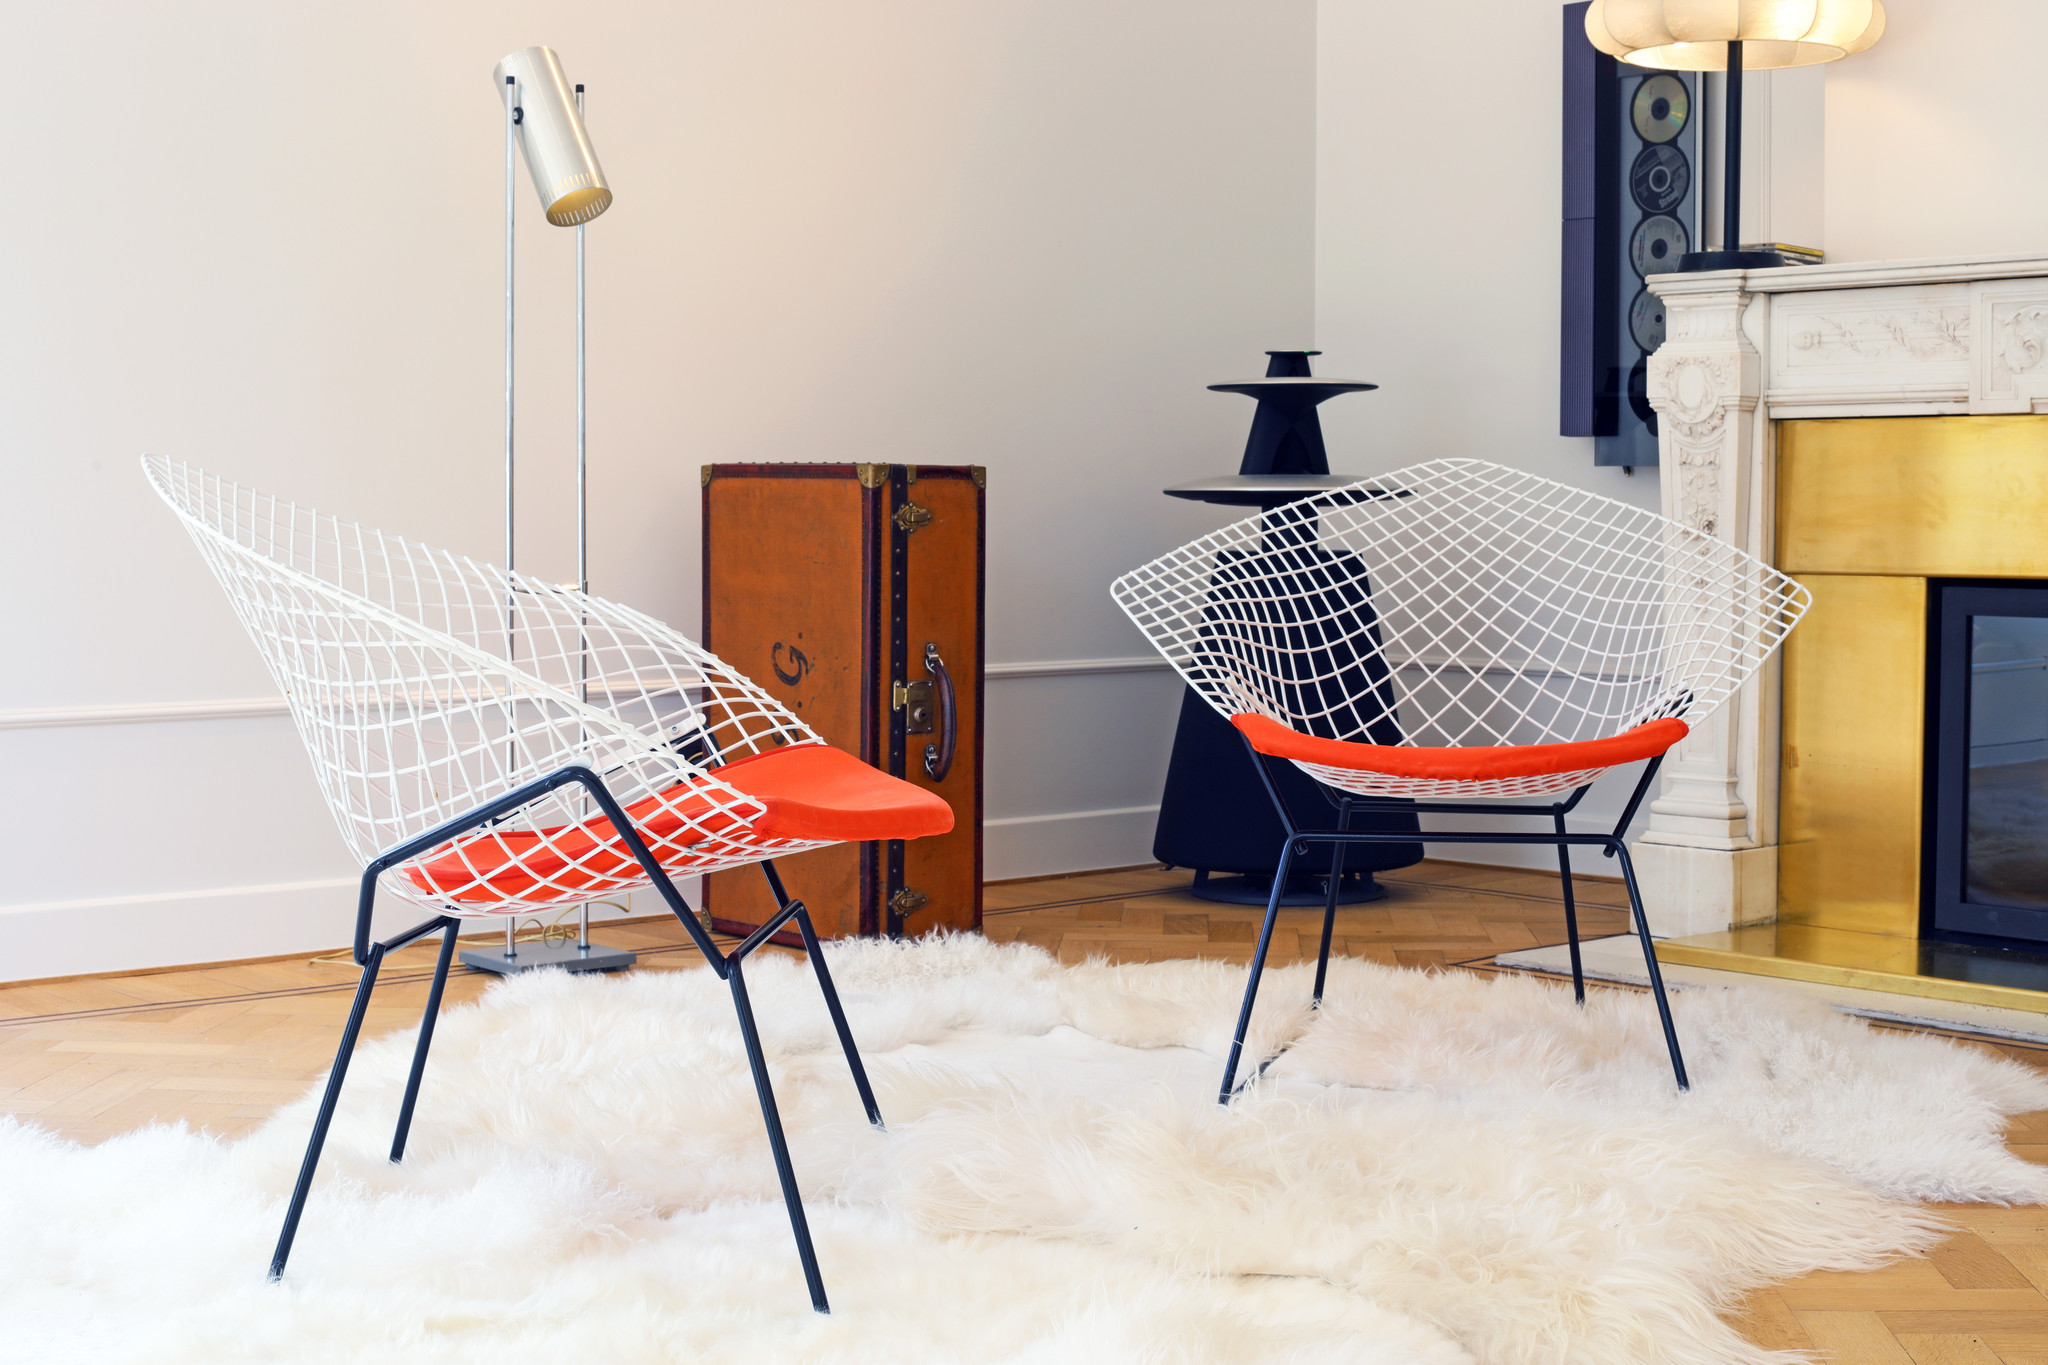 Diamond chairs by Harry Bertoia for Knoll, 1952